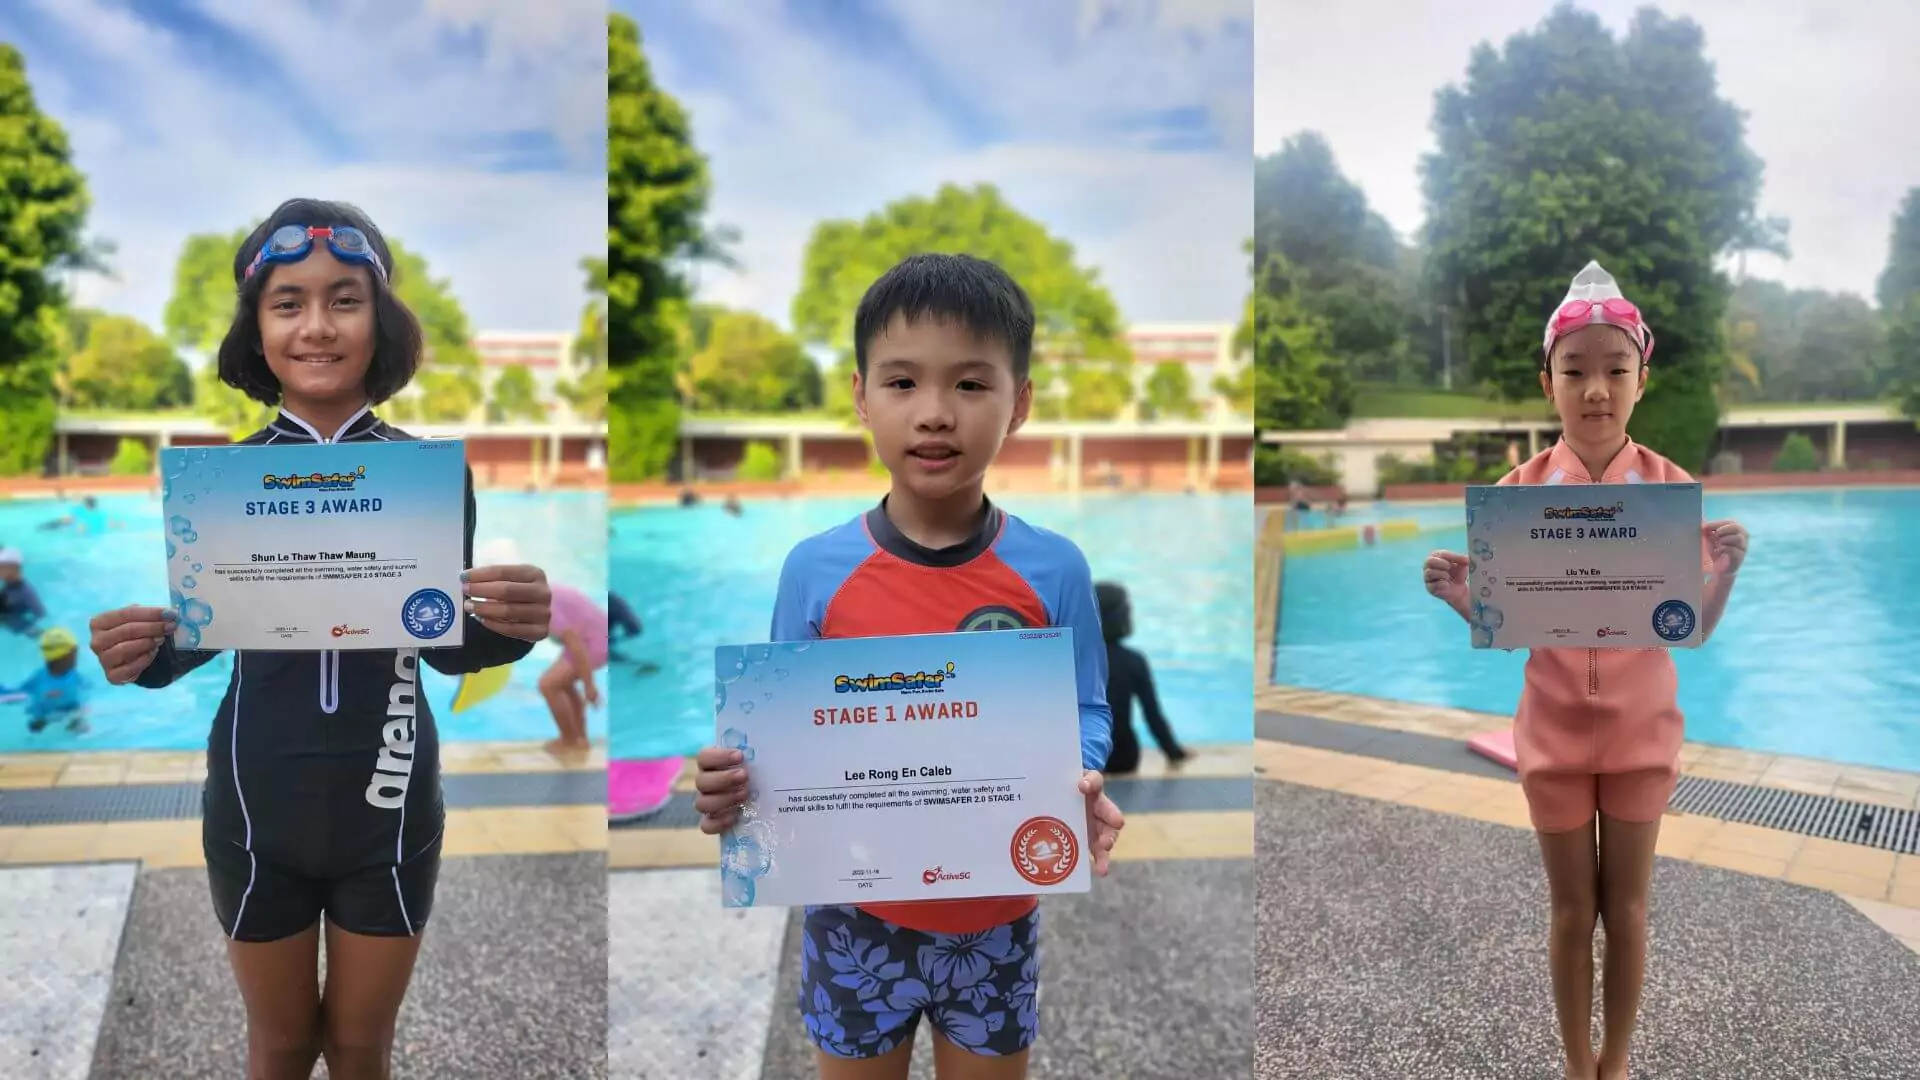 Students participating in MOE SwimSafer lessons at a school swimming pool with Swim101.